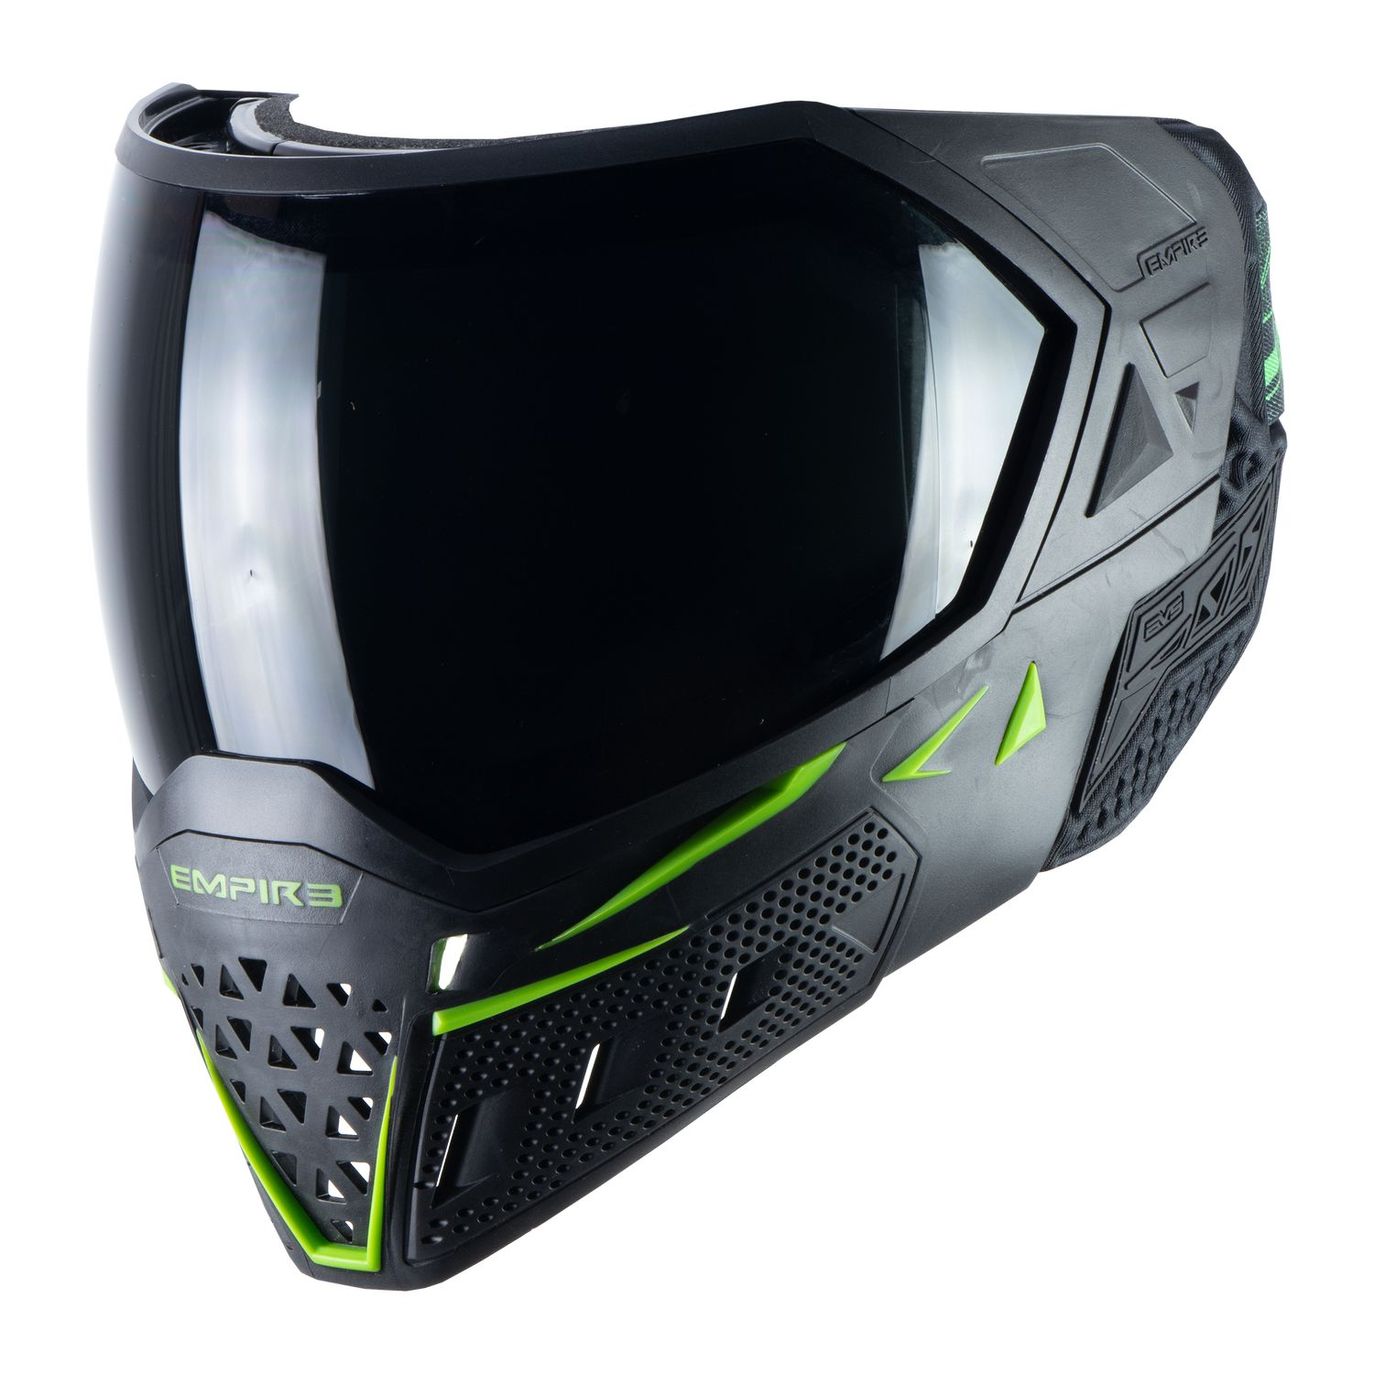 Empire EVS Paintball Goggle - Black / Lime Green